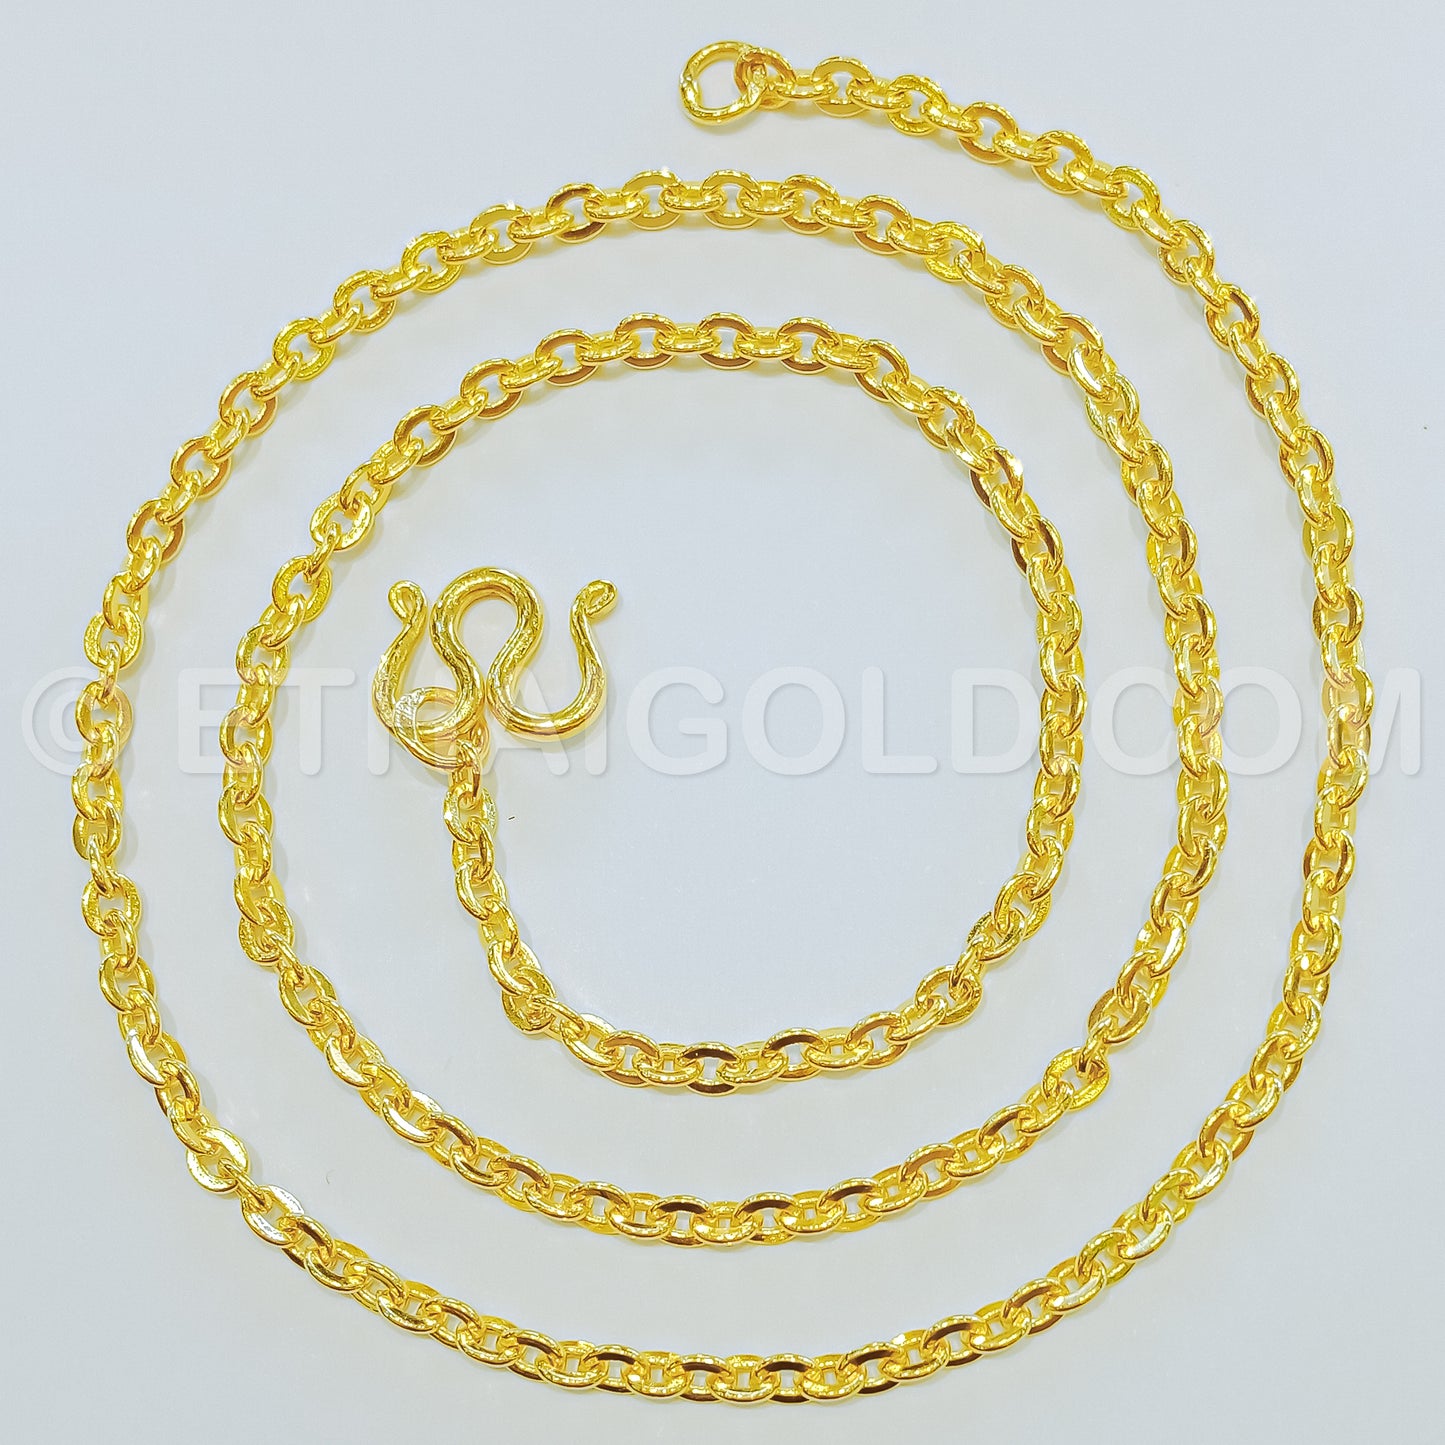 2 BAHT POLISHED SOLID FLAT CABLE CHAIN NECKLACE IN 23K GOLD (ID: N0202B)